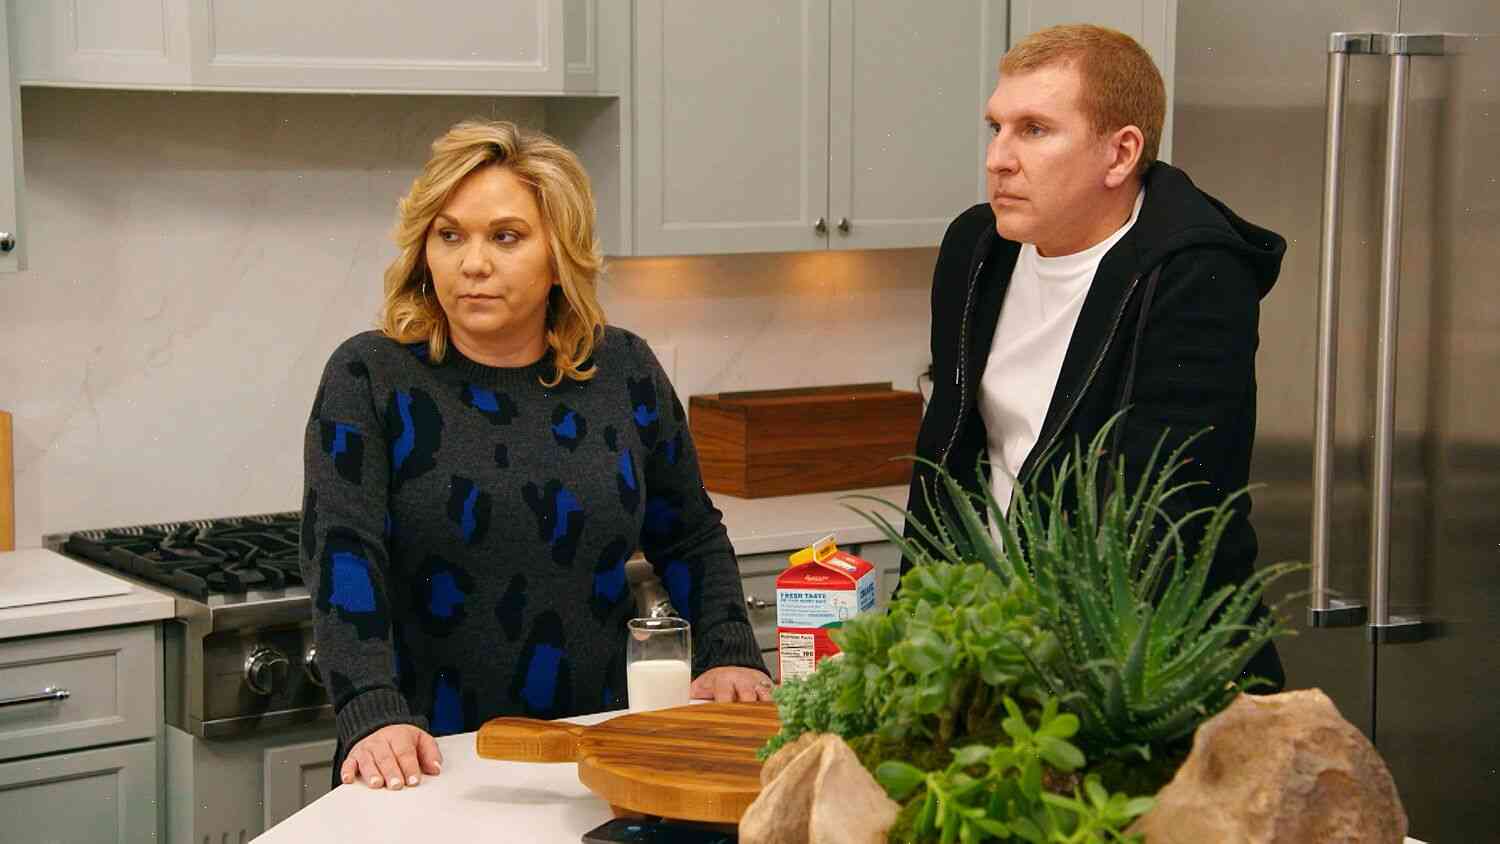 The Chrisley Trial: A Story of the #MeToo Movement